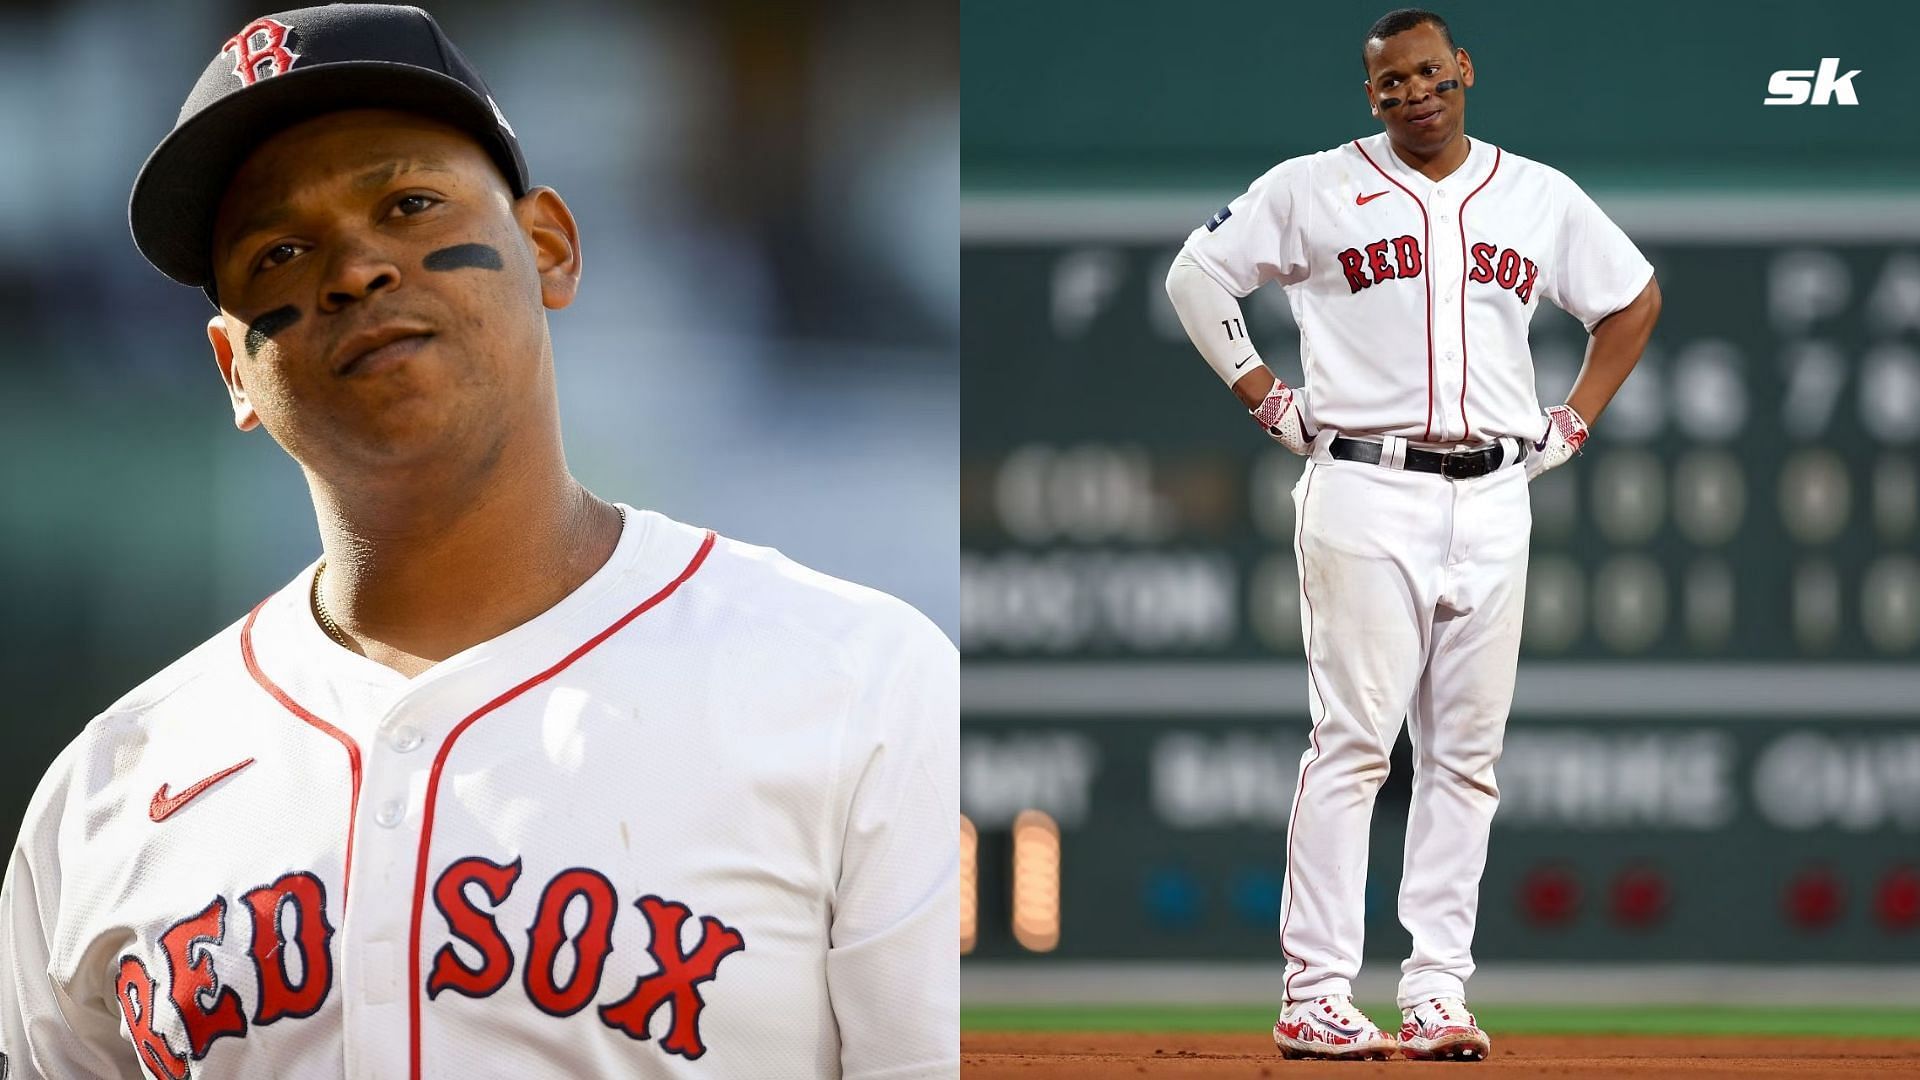 Rafael Devers Injury Update: Red Sox All-Star diagnosed with left knee bone bruise, IL stint not expected